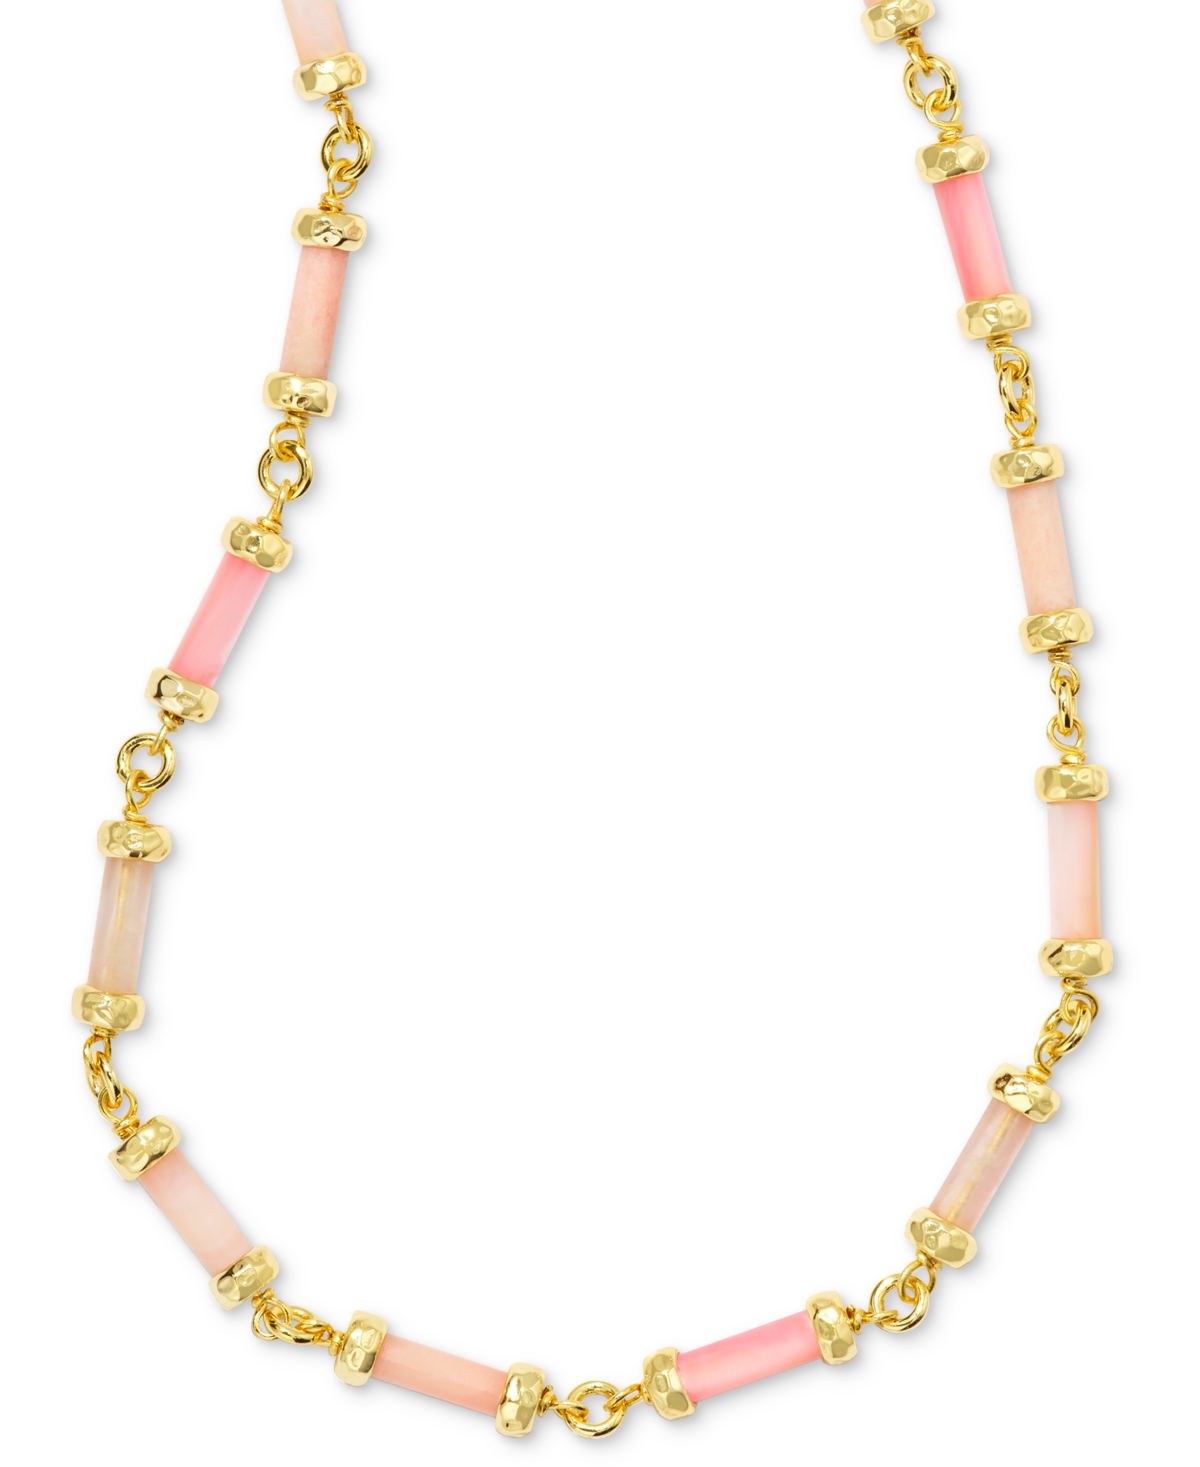 14k Gold-Plated Mixed Bead Adjustable Strand Necklace, 14" + 5" extender - Gold Blue